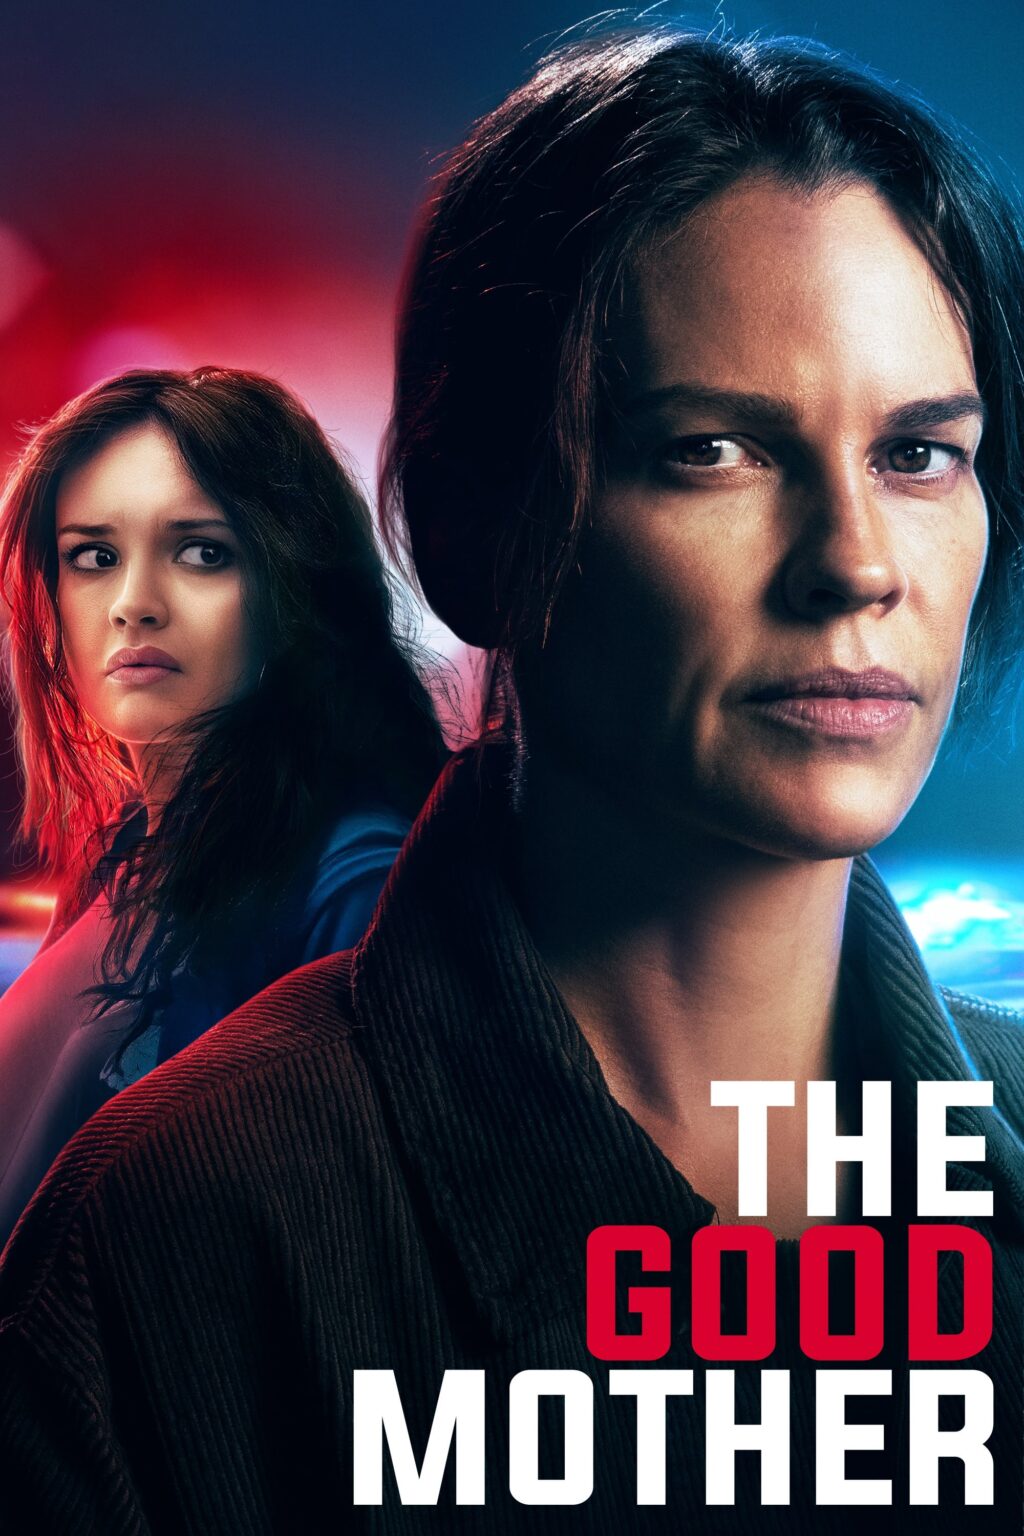 Poster for the movie "The Good Mother"